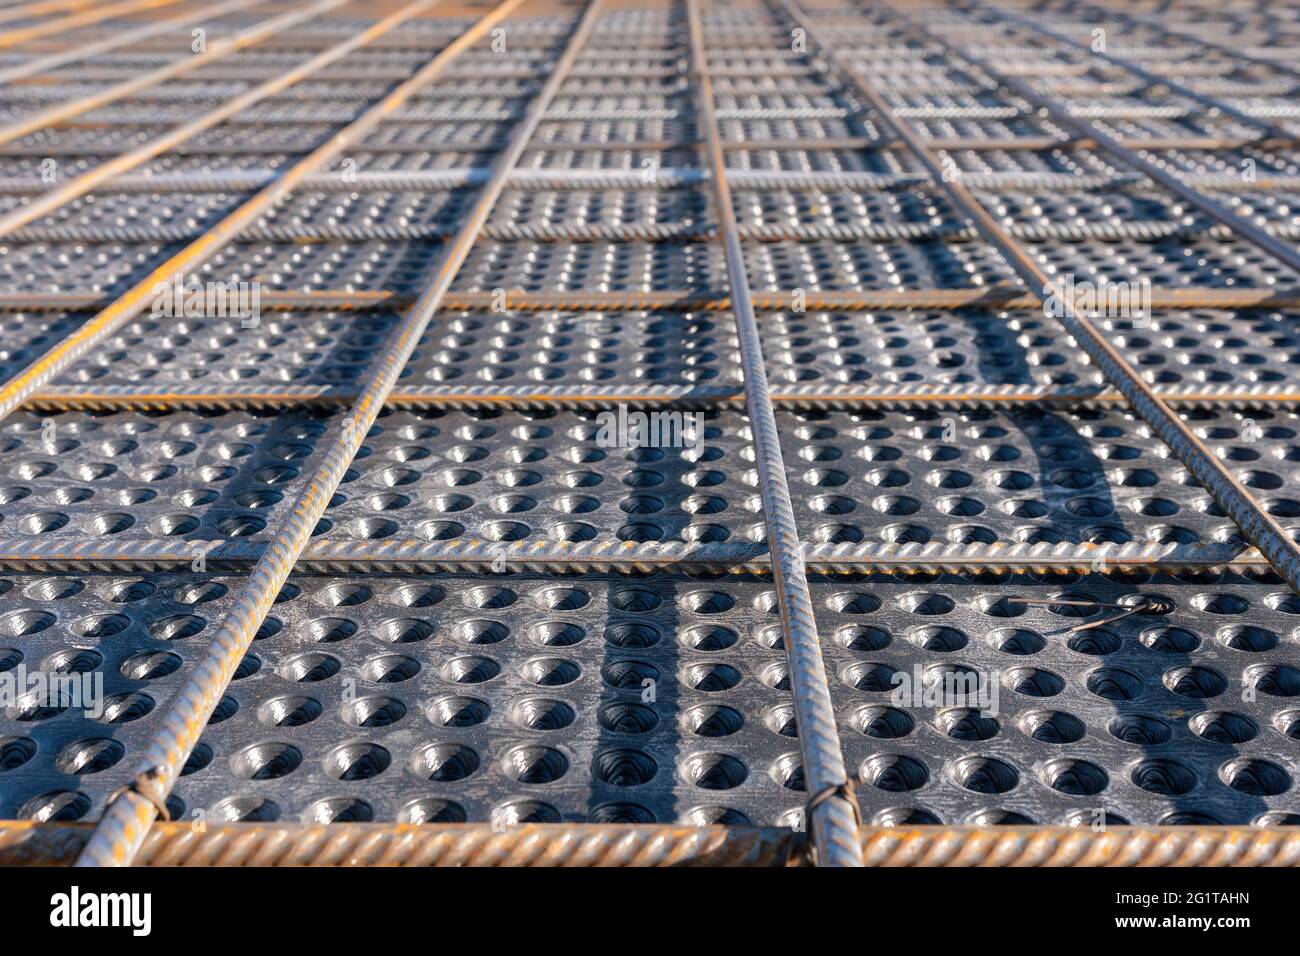 Close up view of reinforcement of concrete. Geometric alignment of Rebars on construction site. Reinforcements steel bars stack. Stock Photo